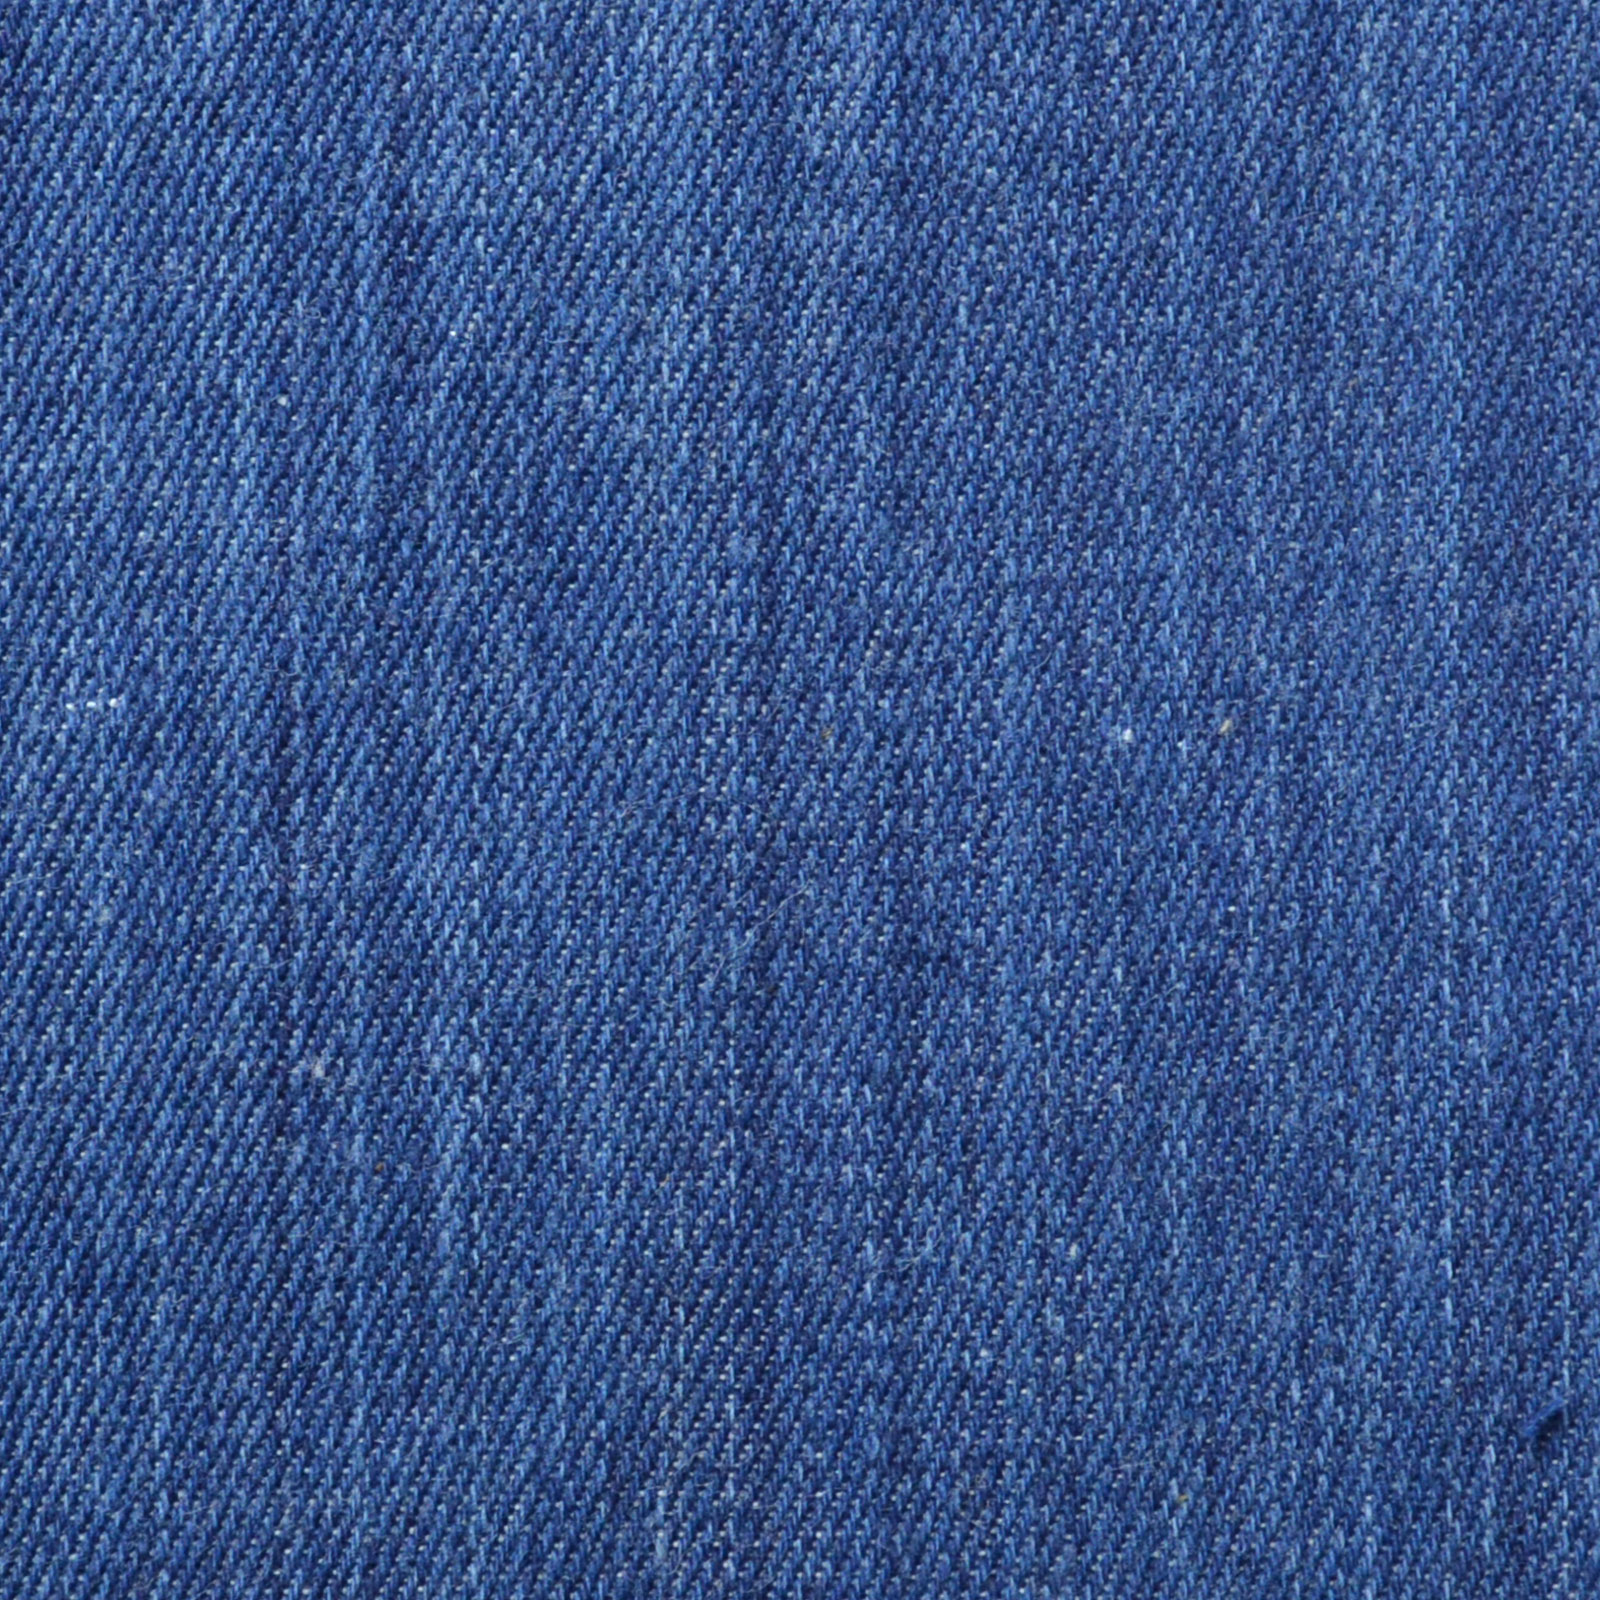 Plain Indigo Blue Brown Linen Twill Thick Fabric Natural Dyes Tie Dyed Linen  Cloth Thickening Plant Dyes Hand Dyed Clothing for Bag 